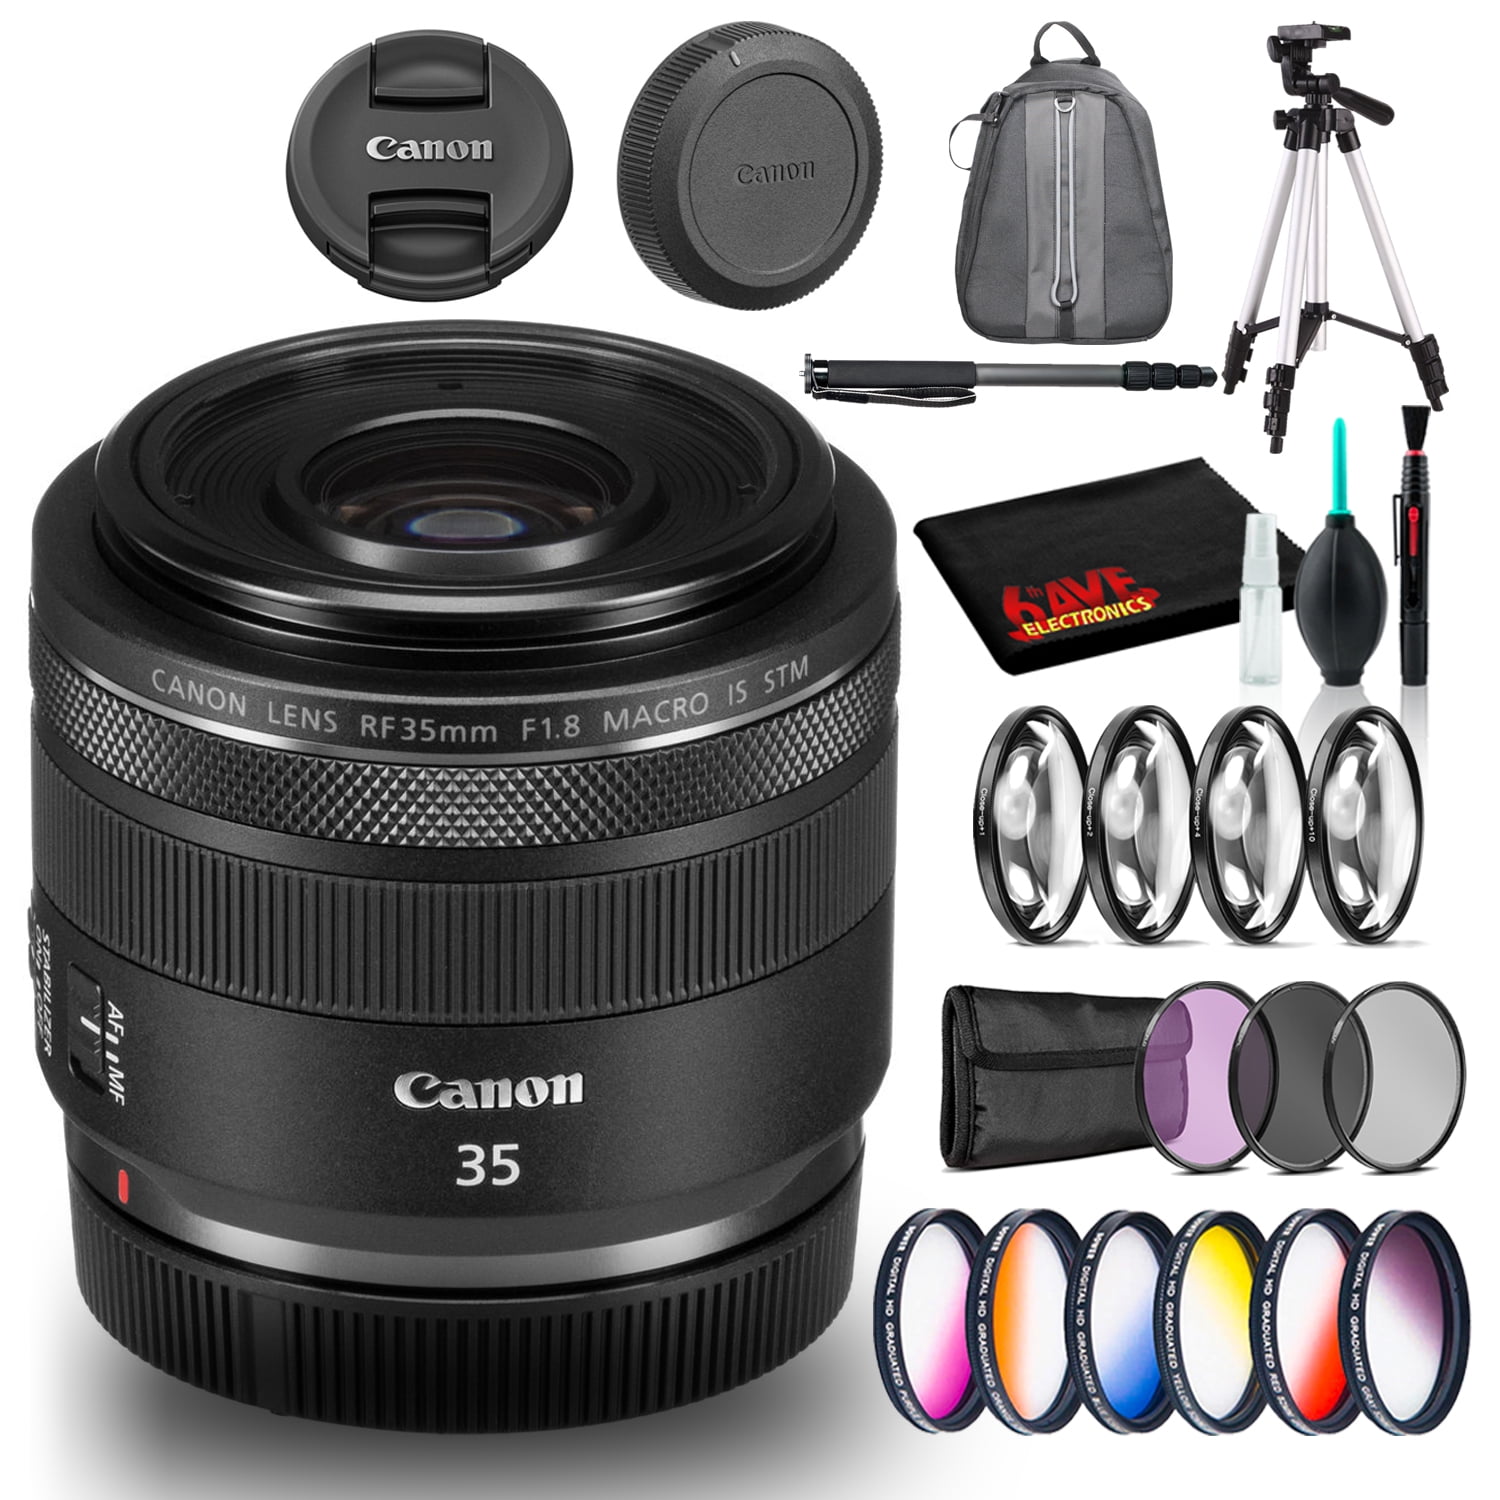 Canon RF 35mm f/1.8 IS Macro STM Lens (Intl Model) With Filters